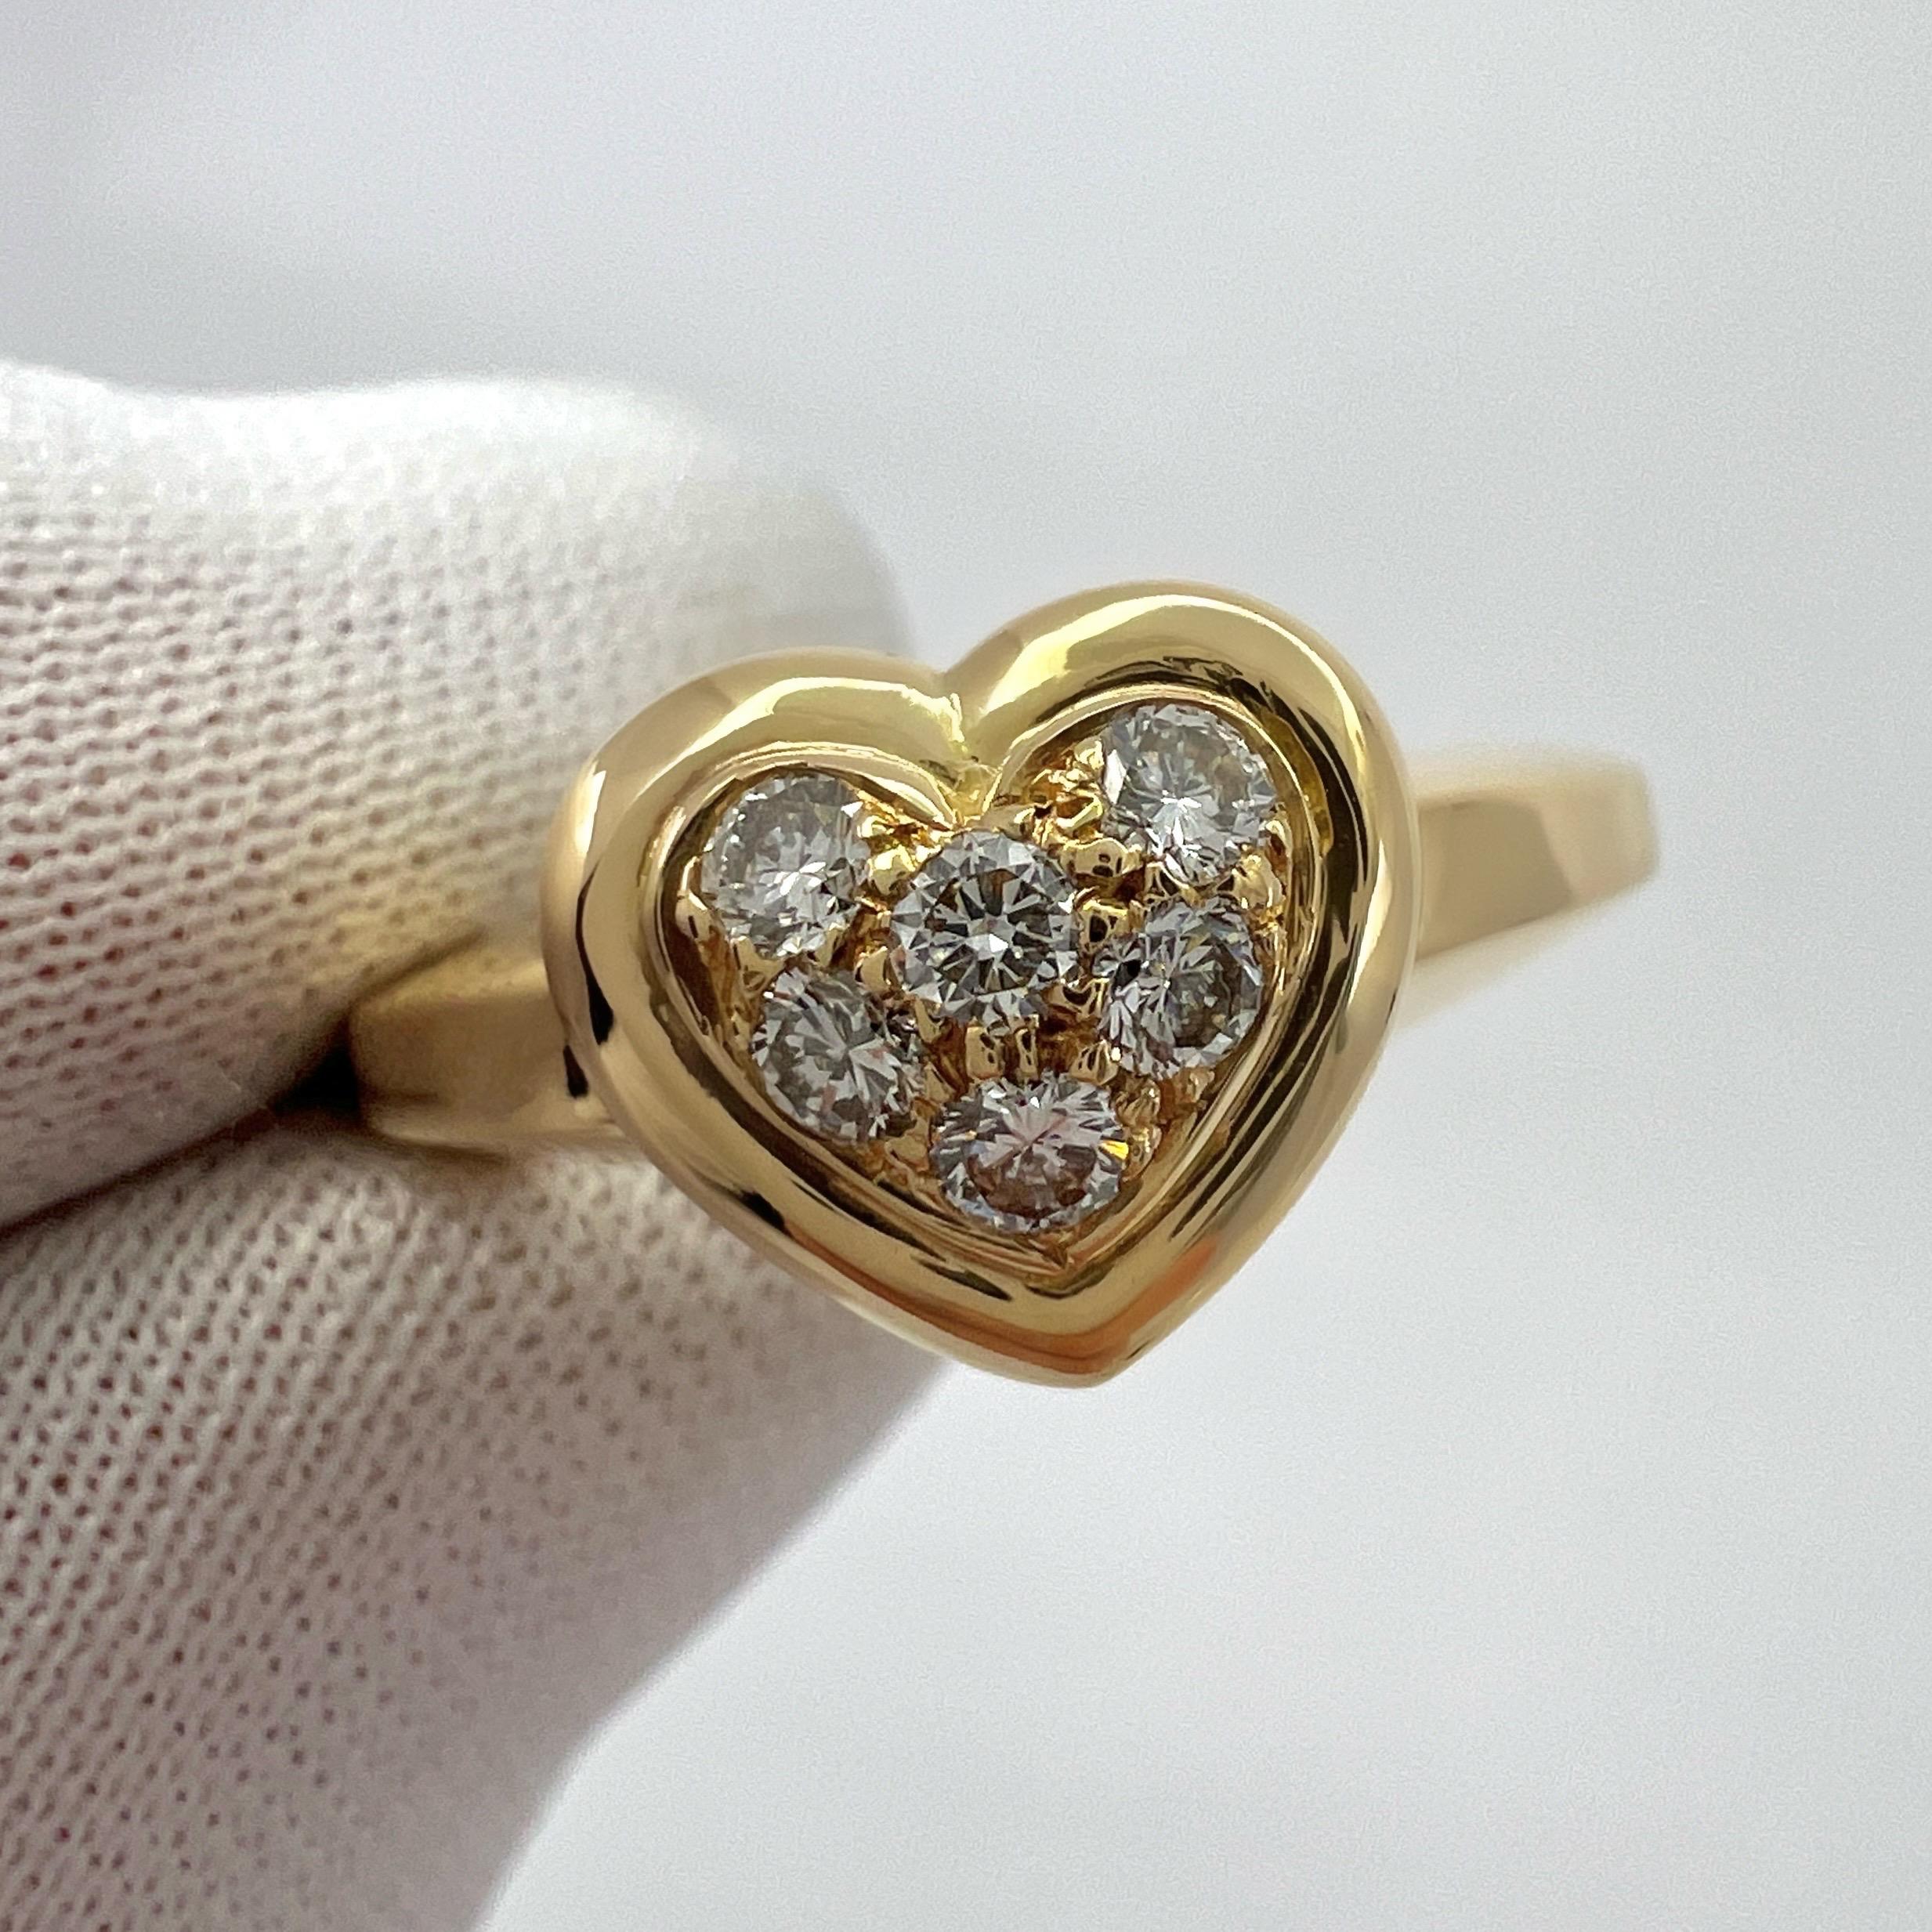 Very Rare Vintage Van Cleef & Arpels 18k Yellow Gold Diamond Heart Ring AND Pendant.

A unique and rare piece by Van Cleef & Arpels. A diamond set heart that measures 9mm x 10.2mm across. Set with x6 round brilliant cut natural diamonds. These have